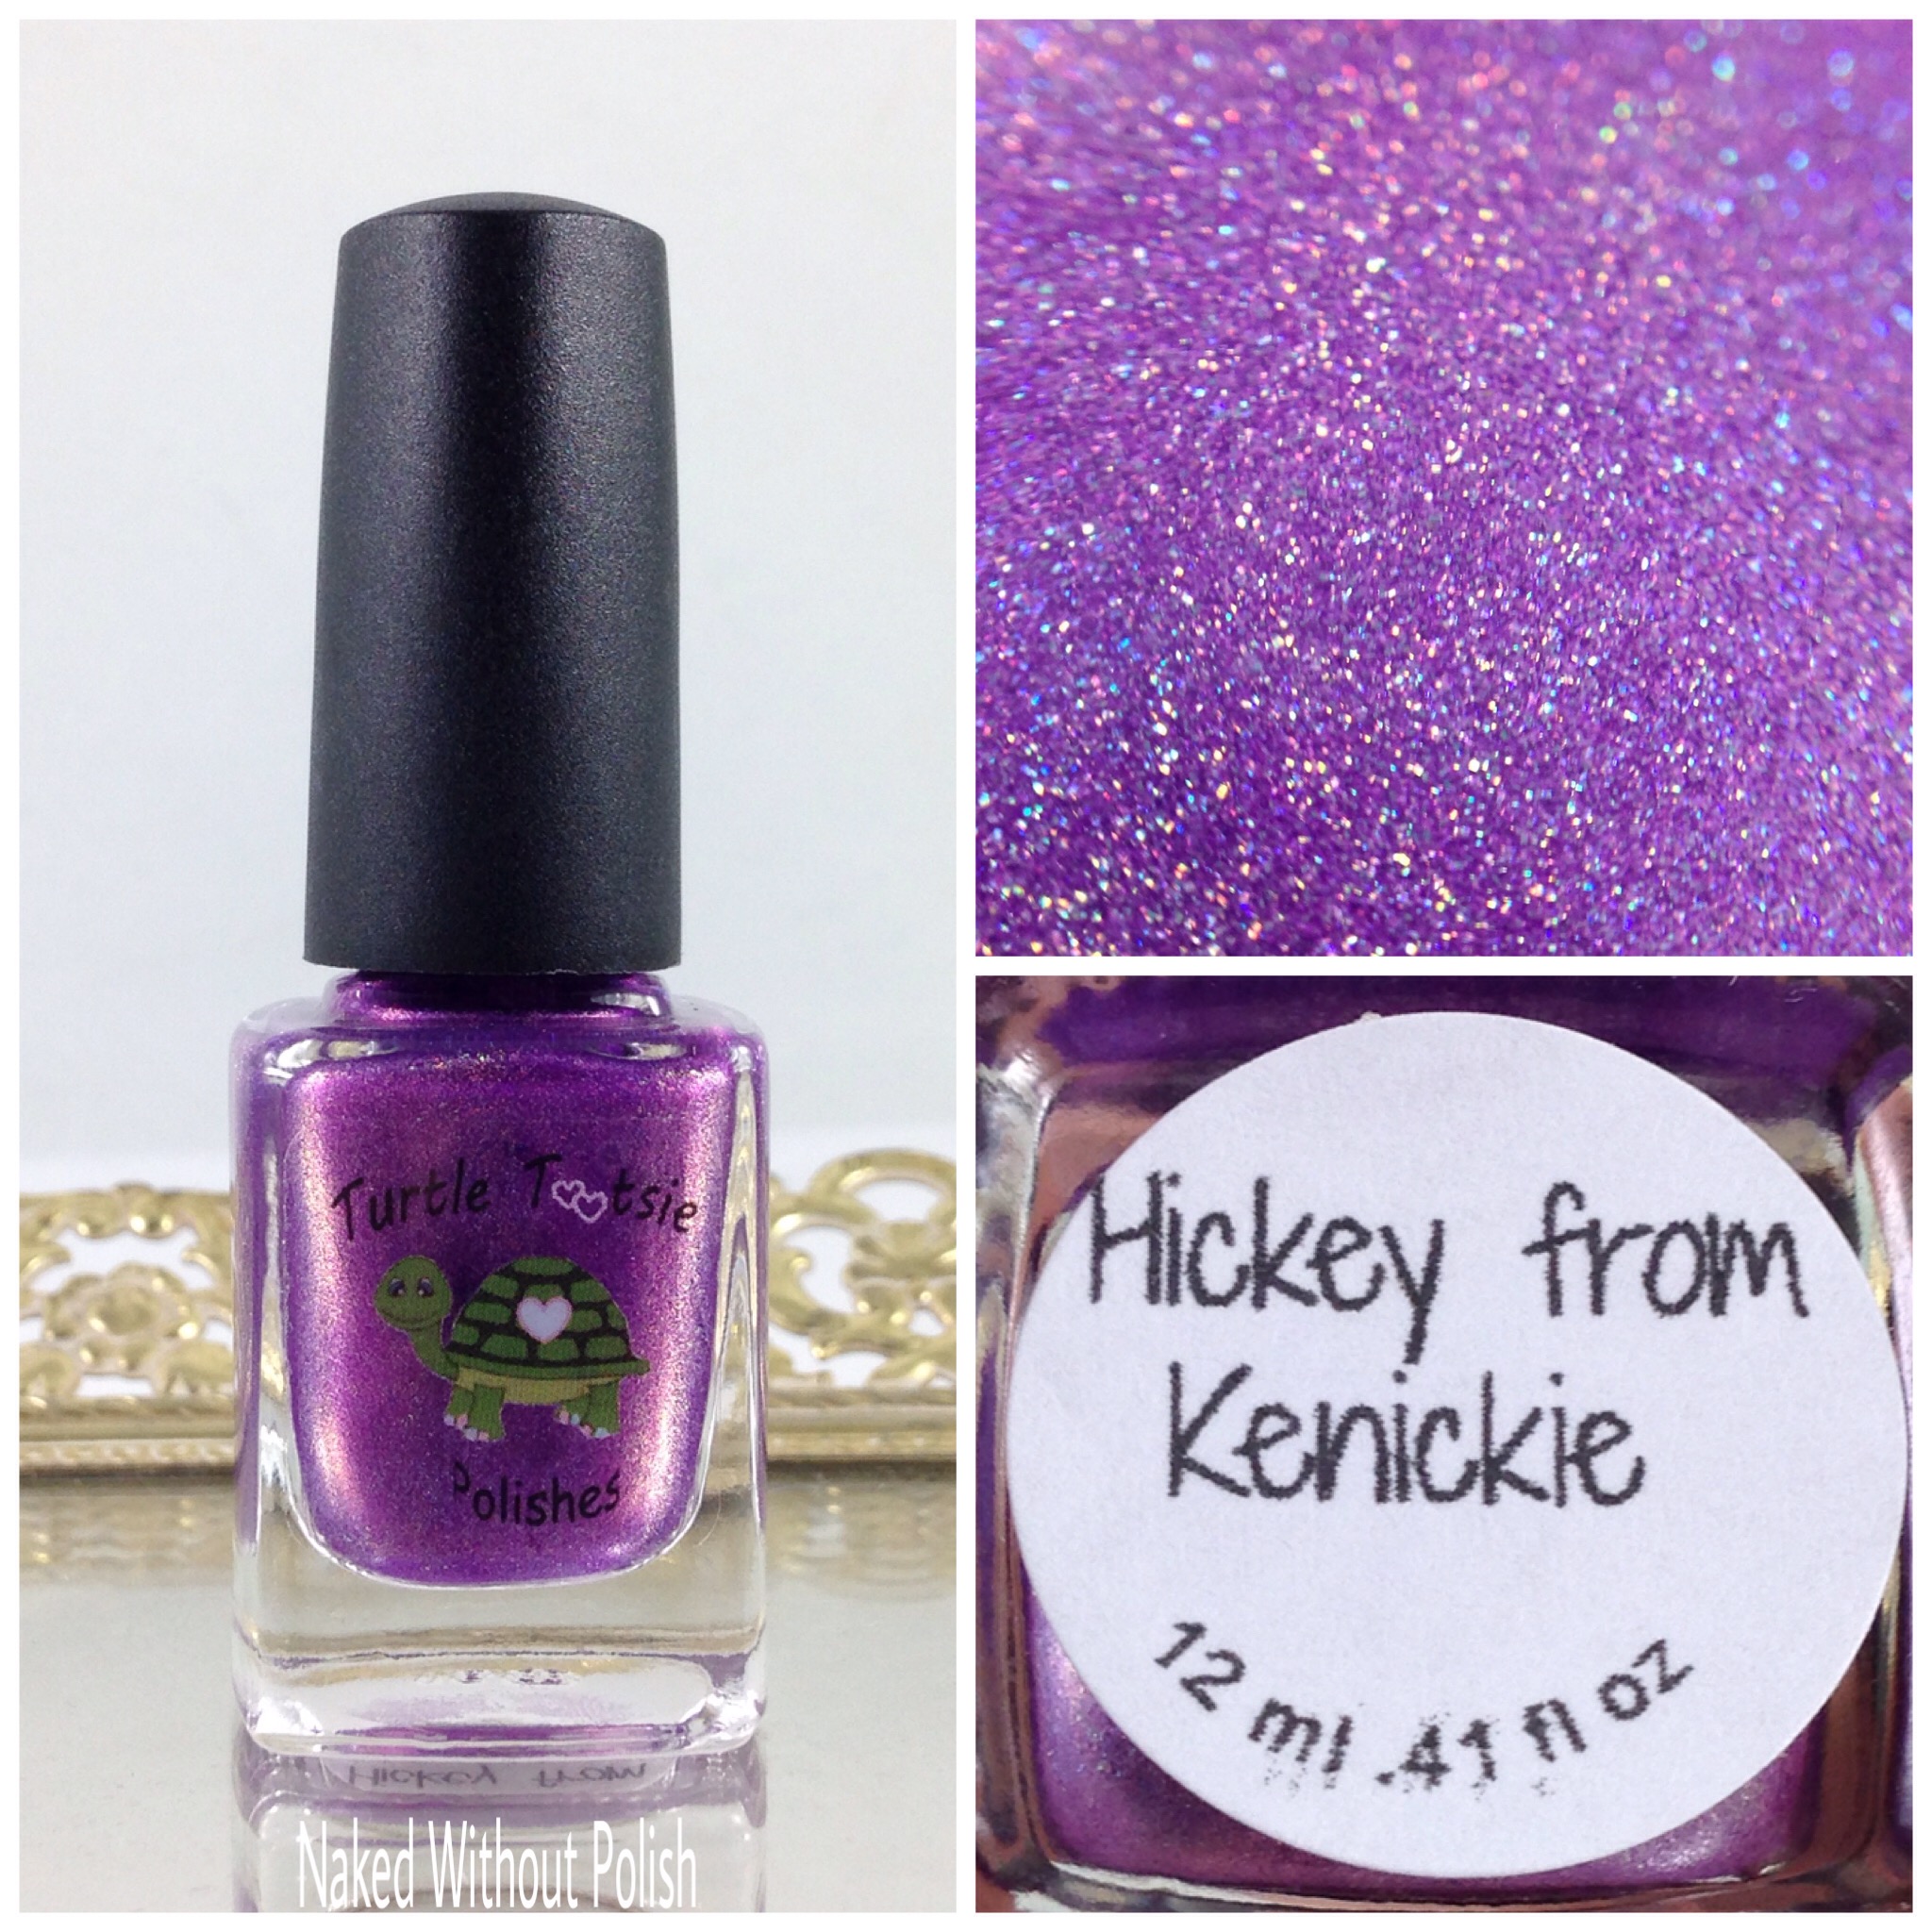 Turtle-Tootsie-Polishes-Hickey-from-Kenickie-1